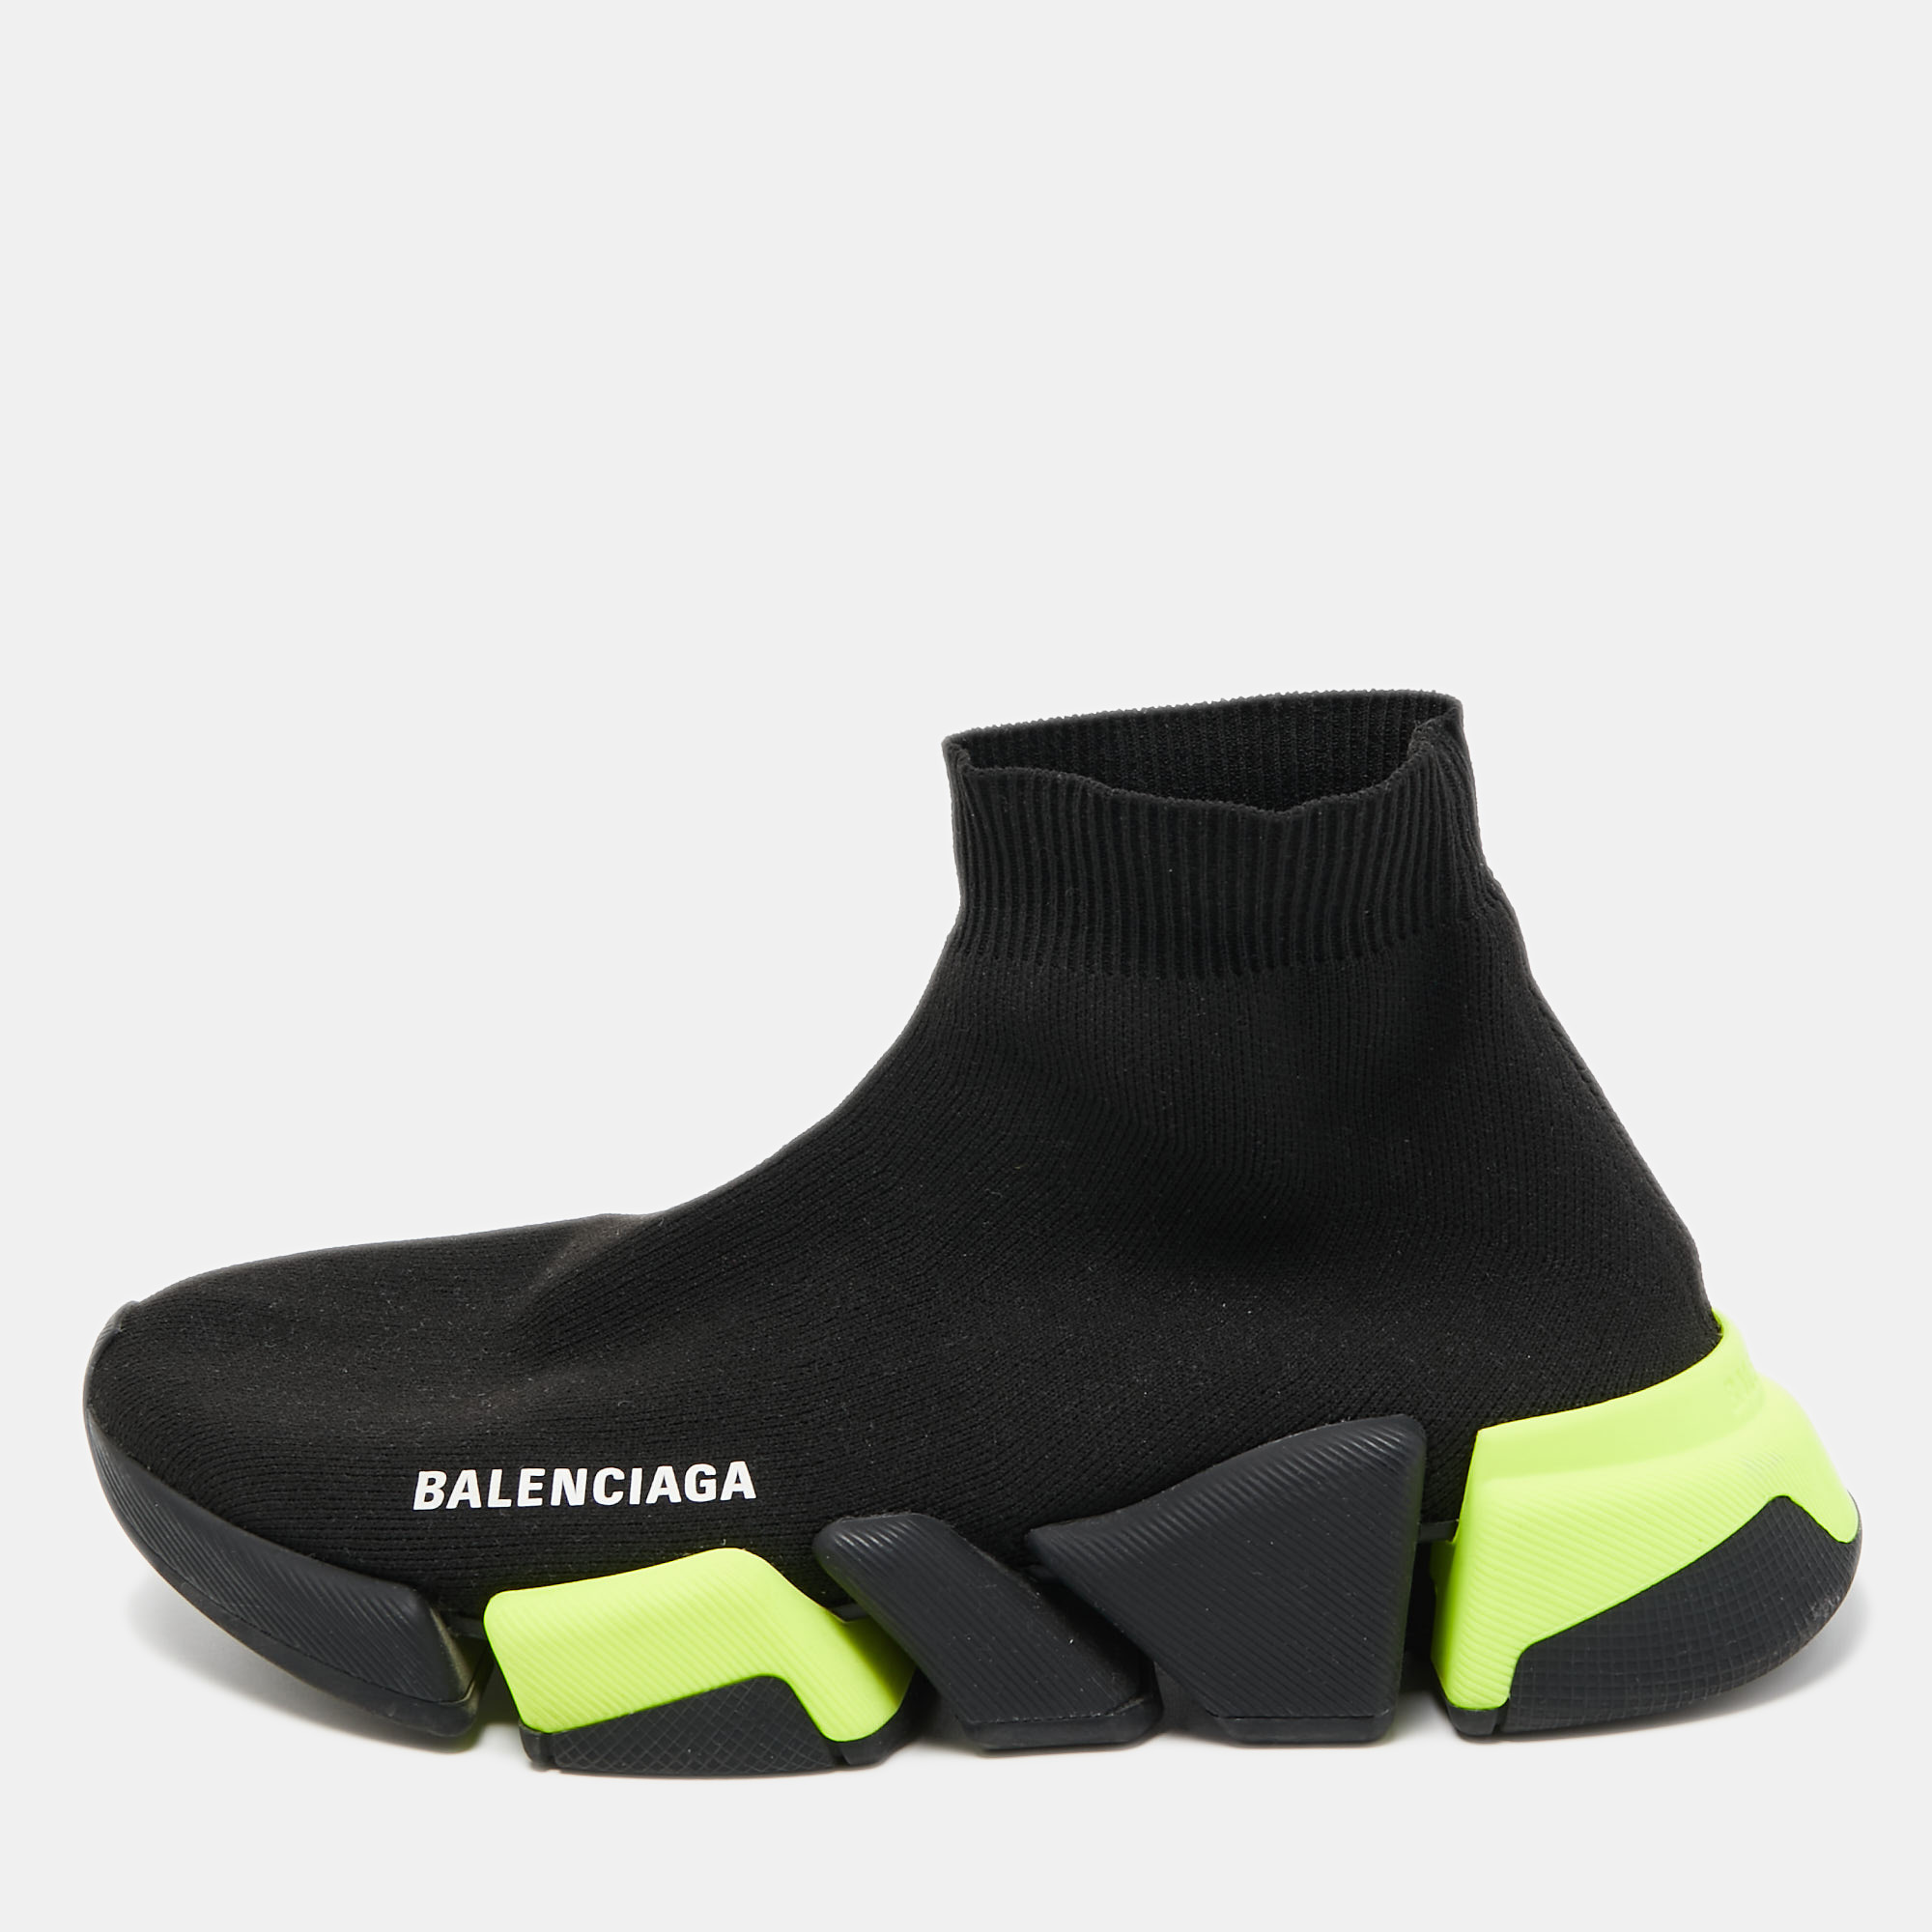 Balenciaga Black Knit Fabric Speed 2.0 High Top Sneakers Size 37